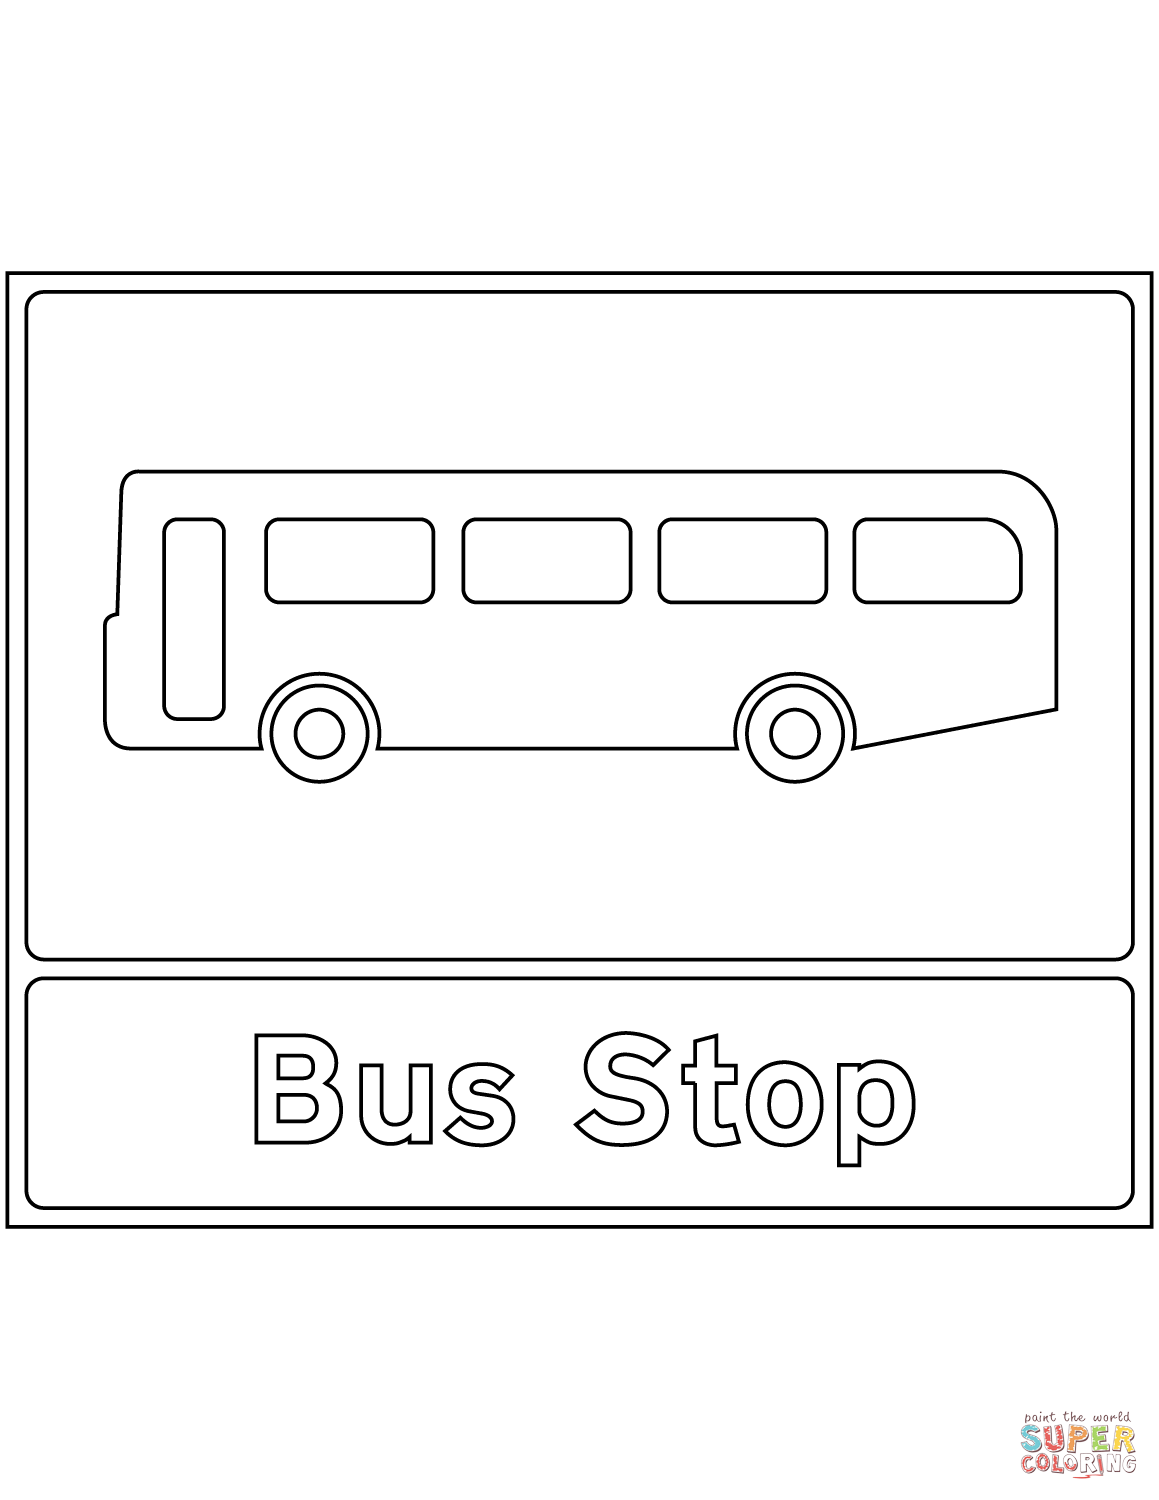 Bus stop sign in the united kingdom coloring page free printable coloring pages